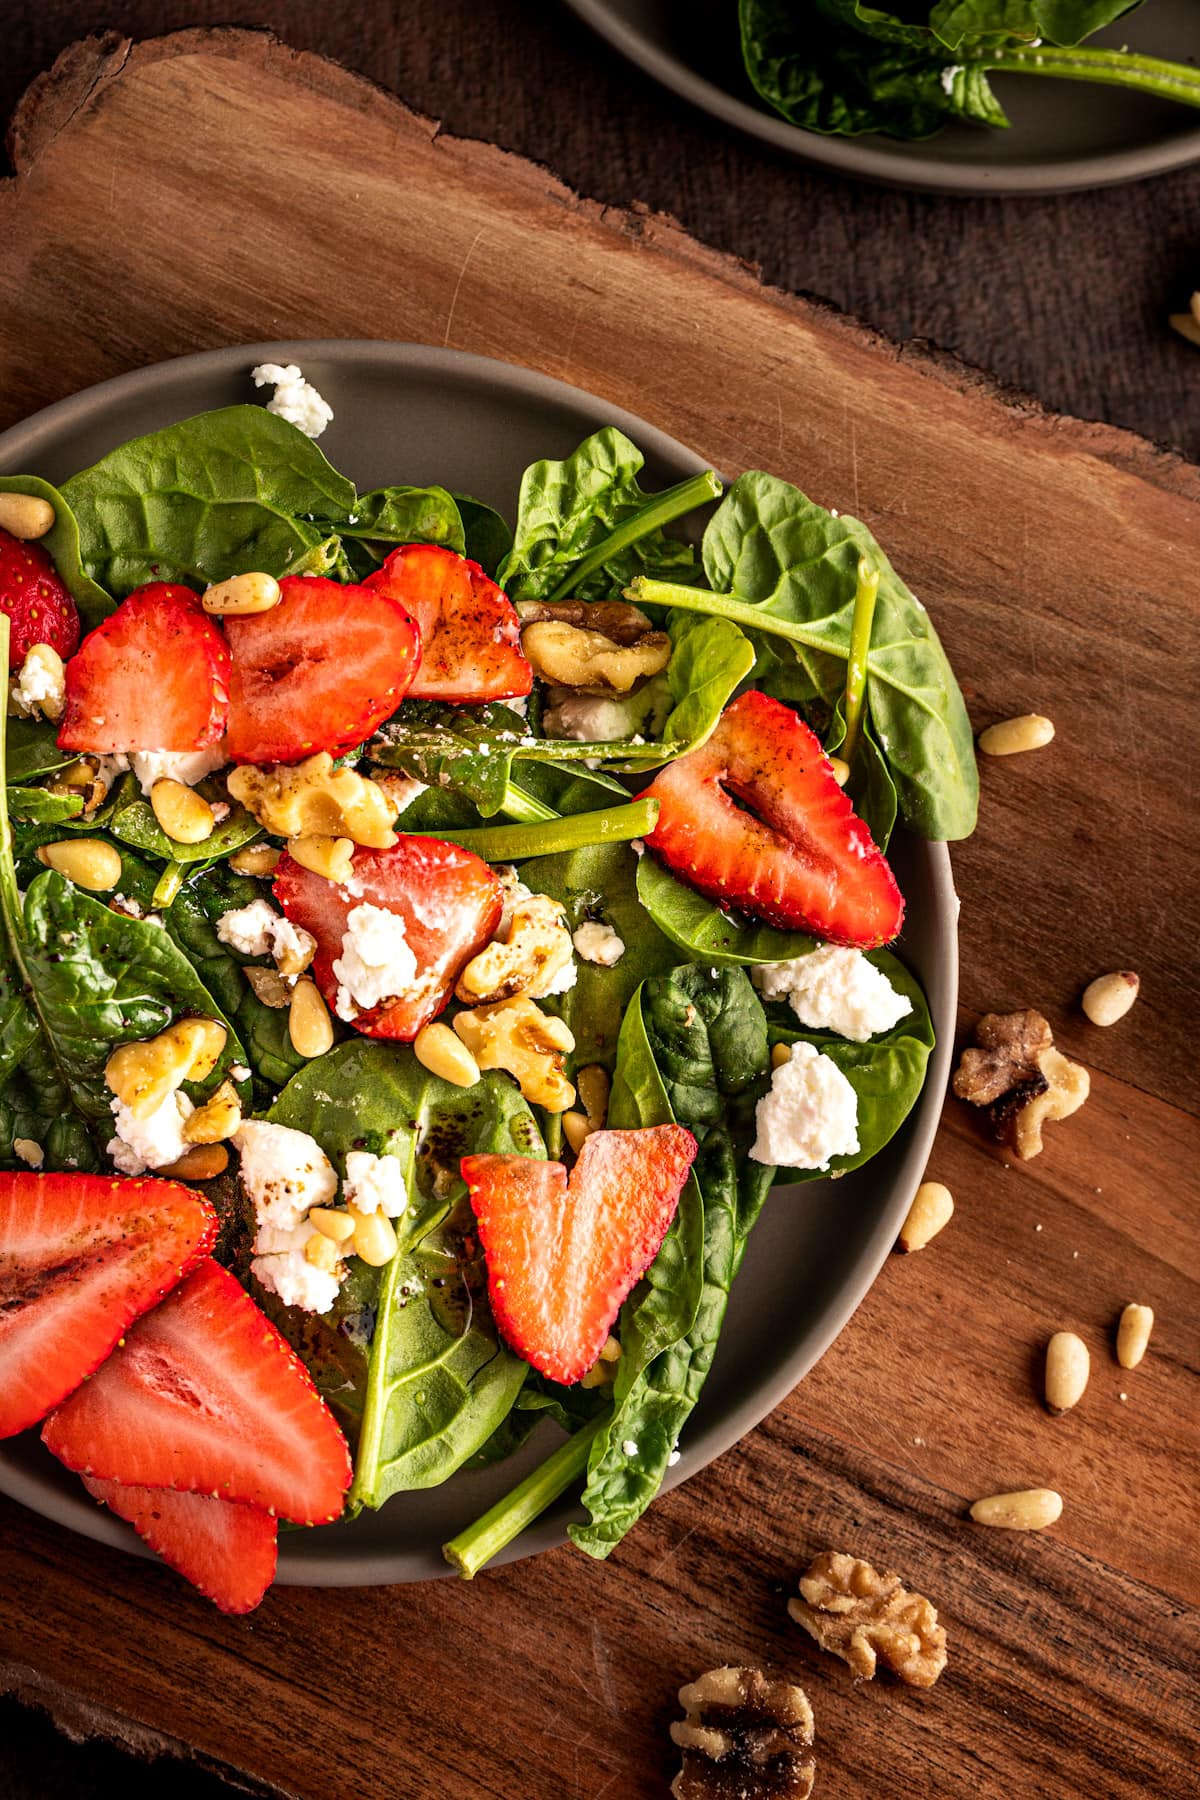 Overhead view of the strawberry goat cheese salad, on a wooden table.